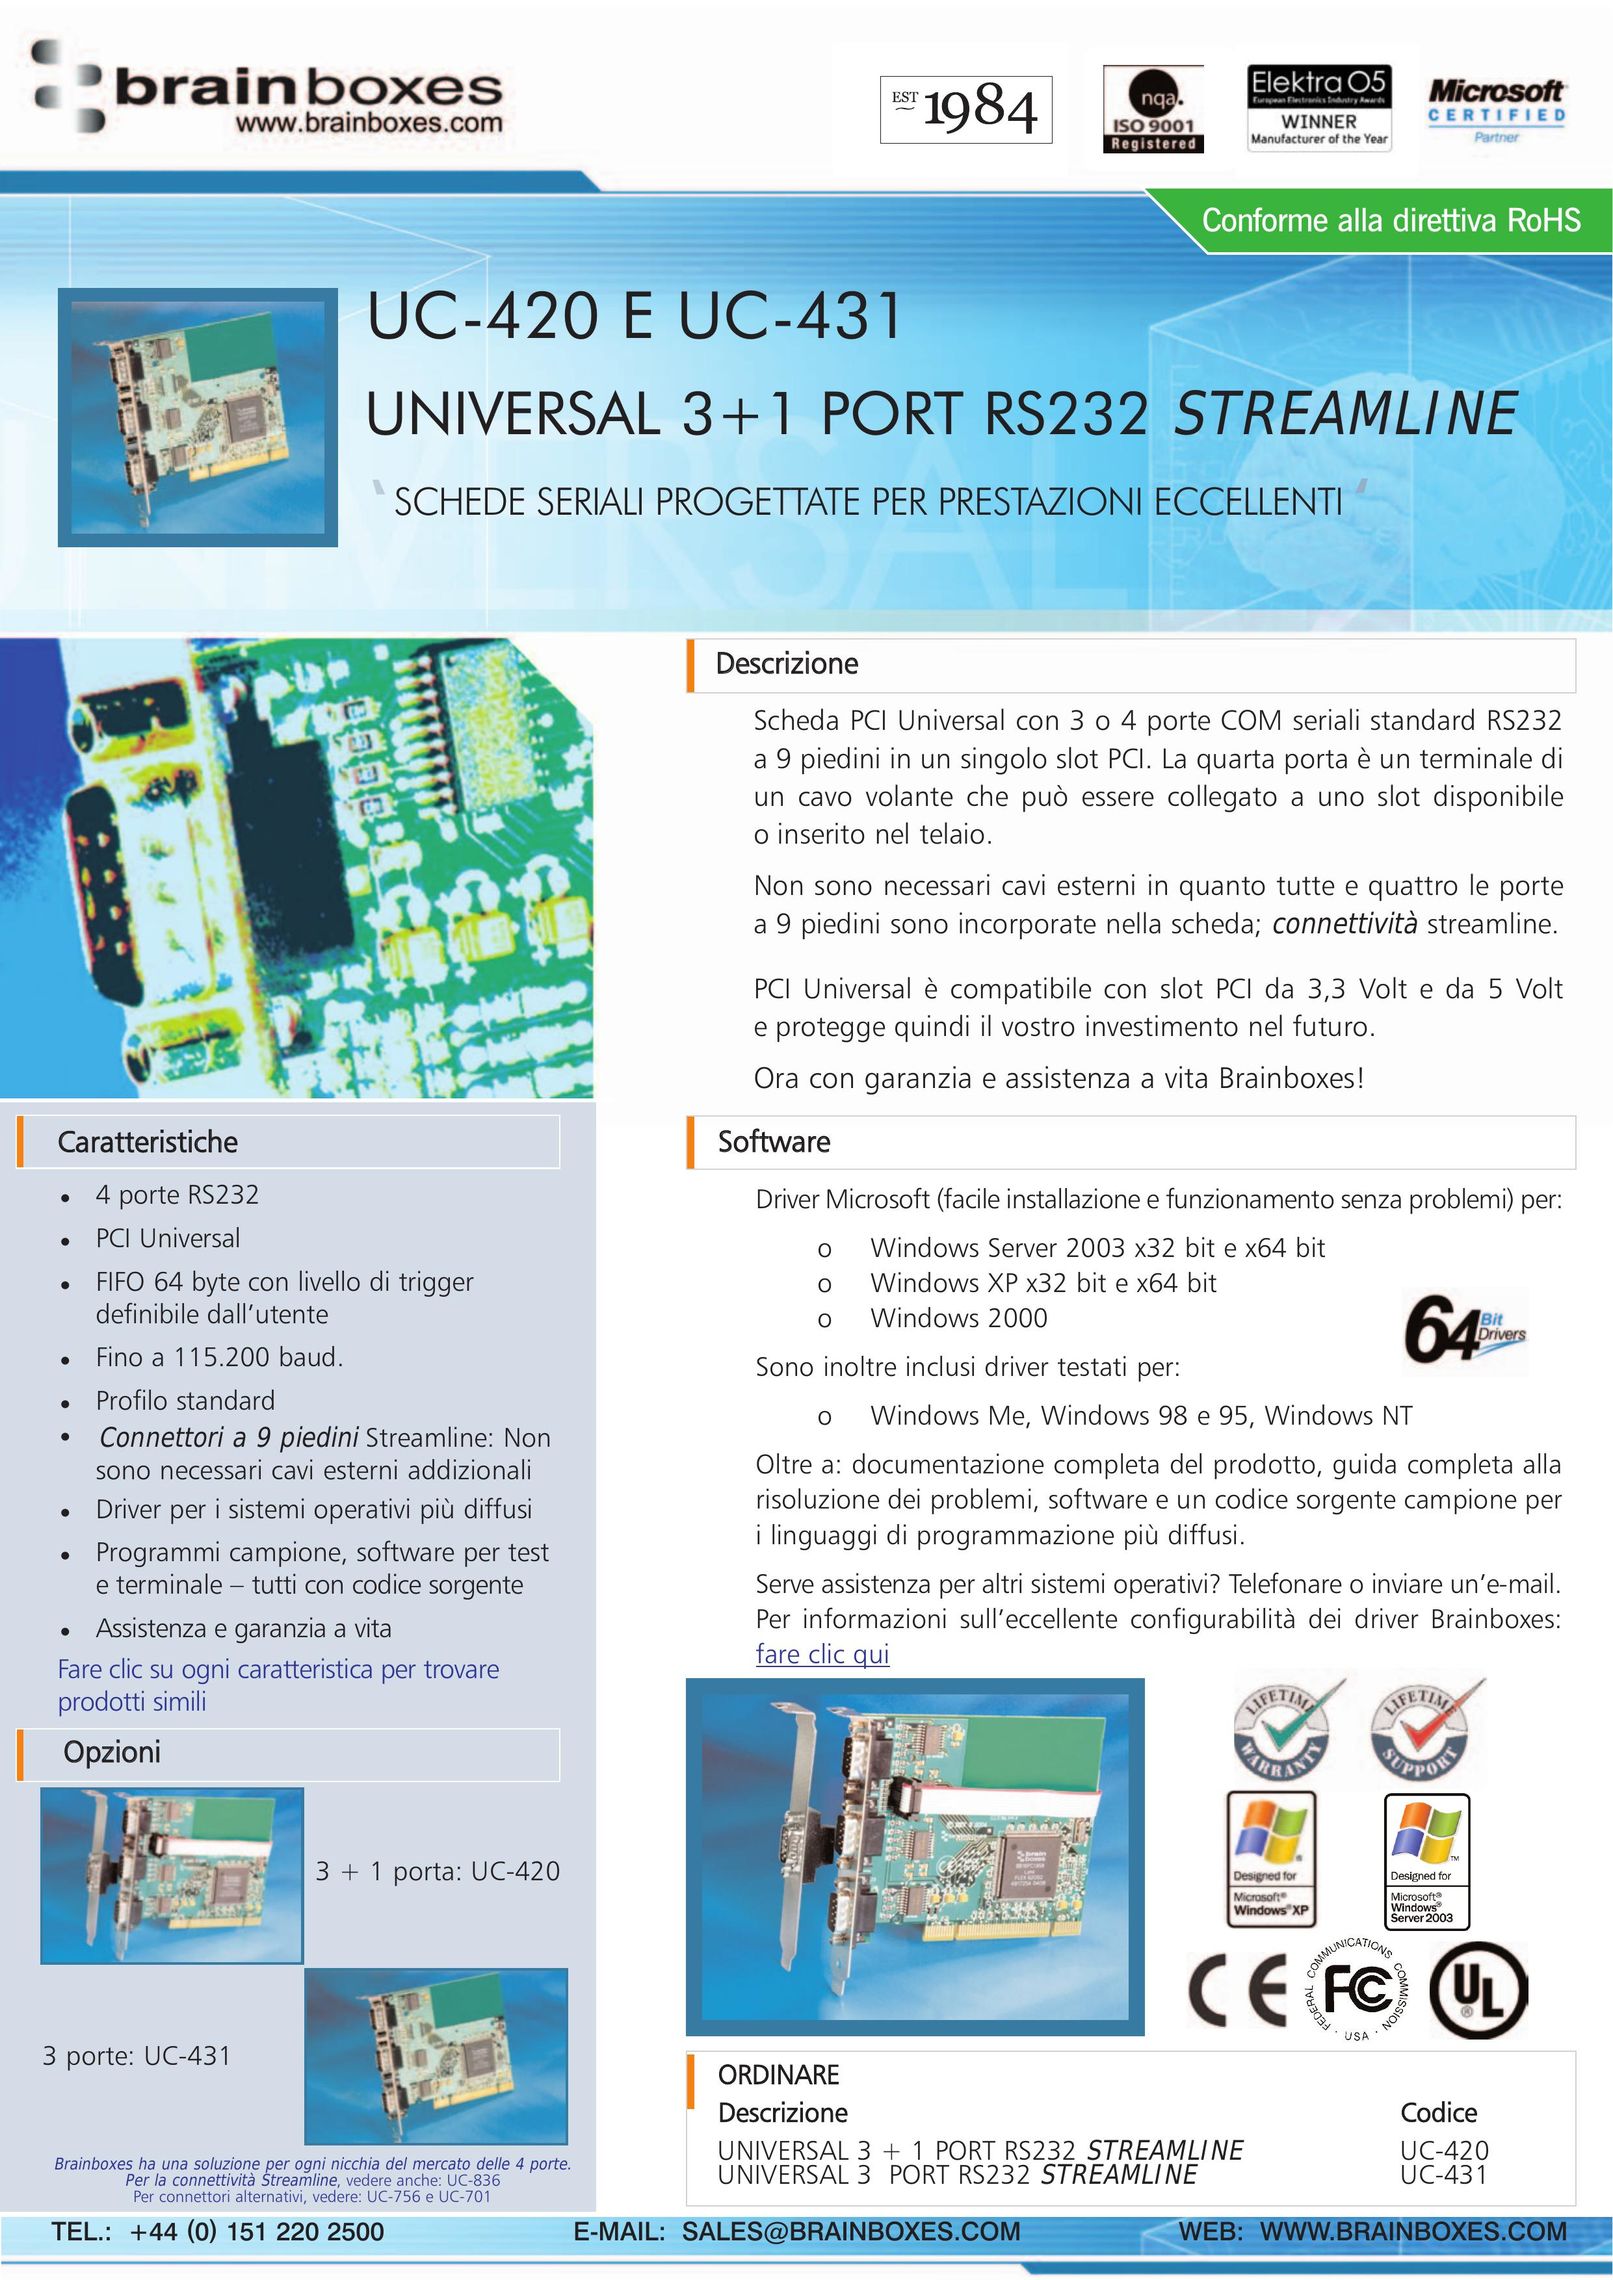 Brainboxes UC-420 Network Card User Manual